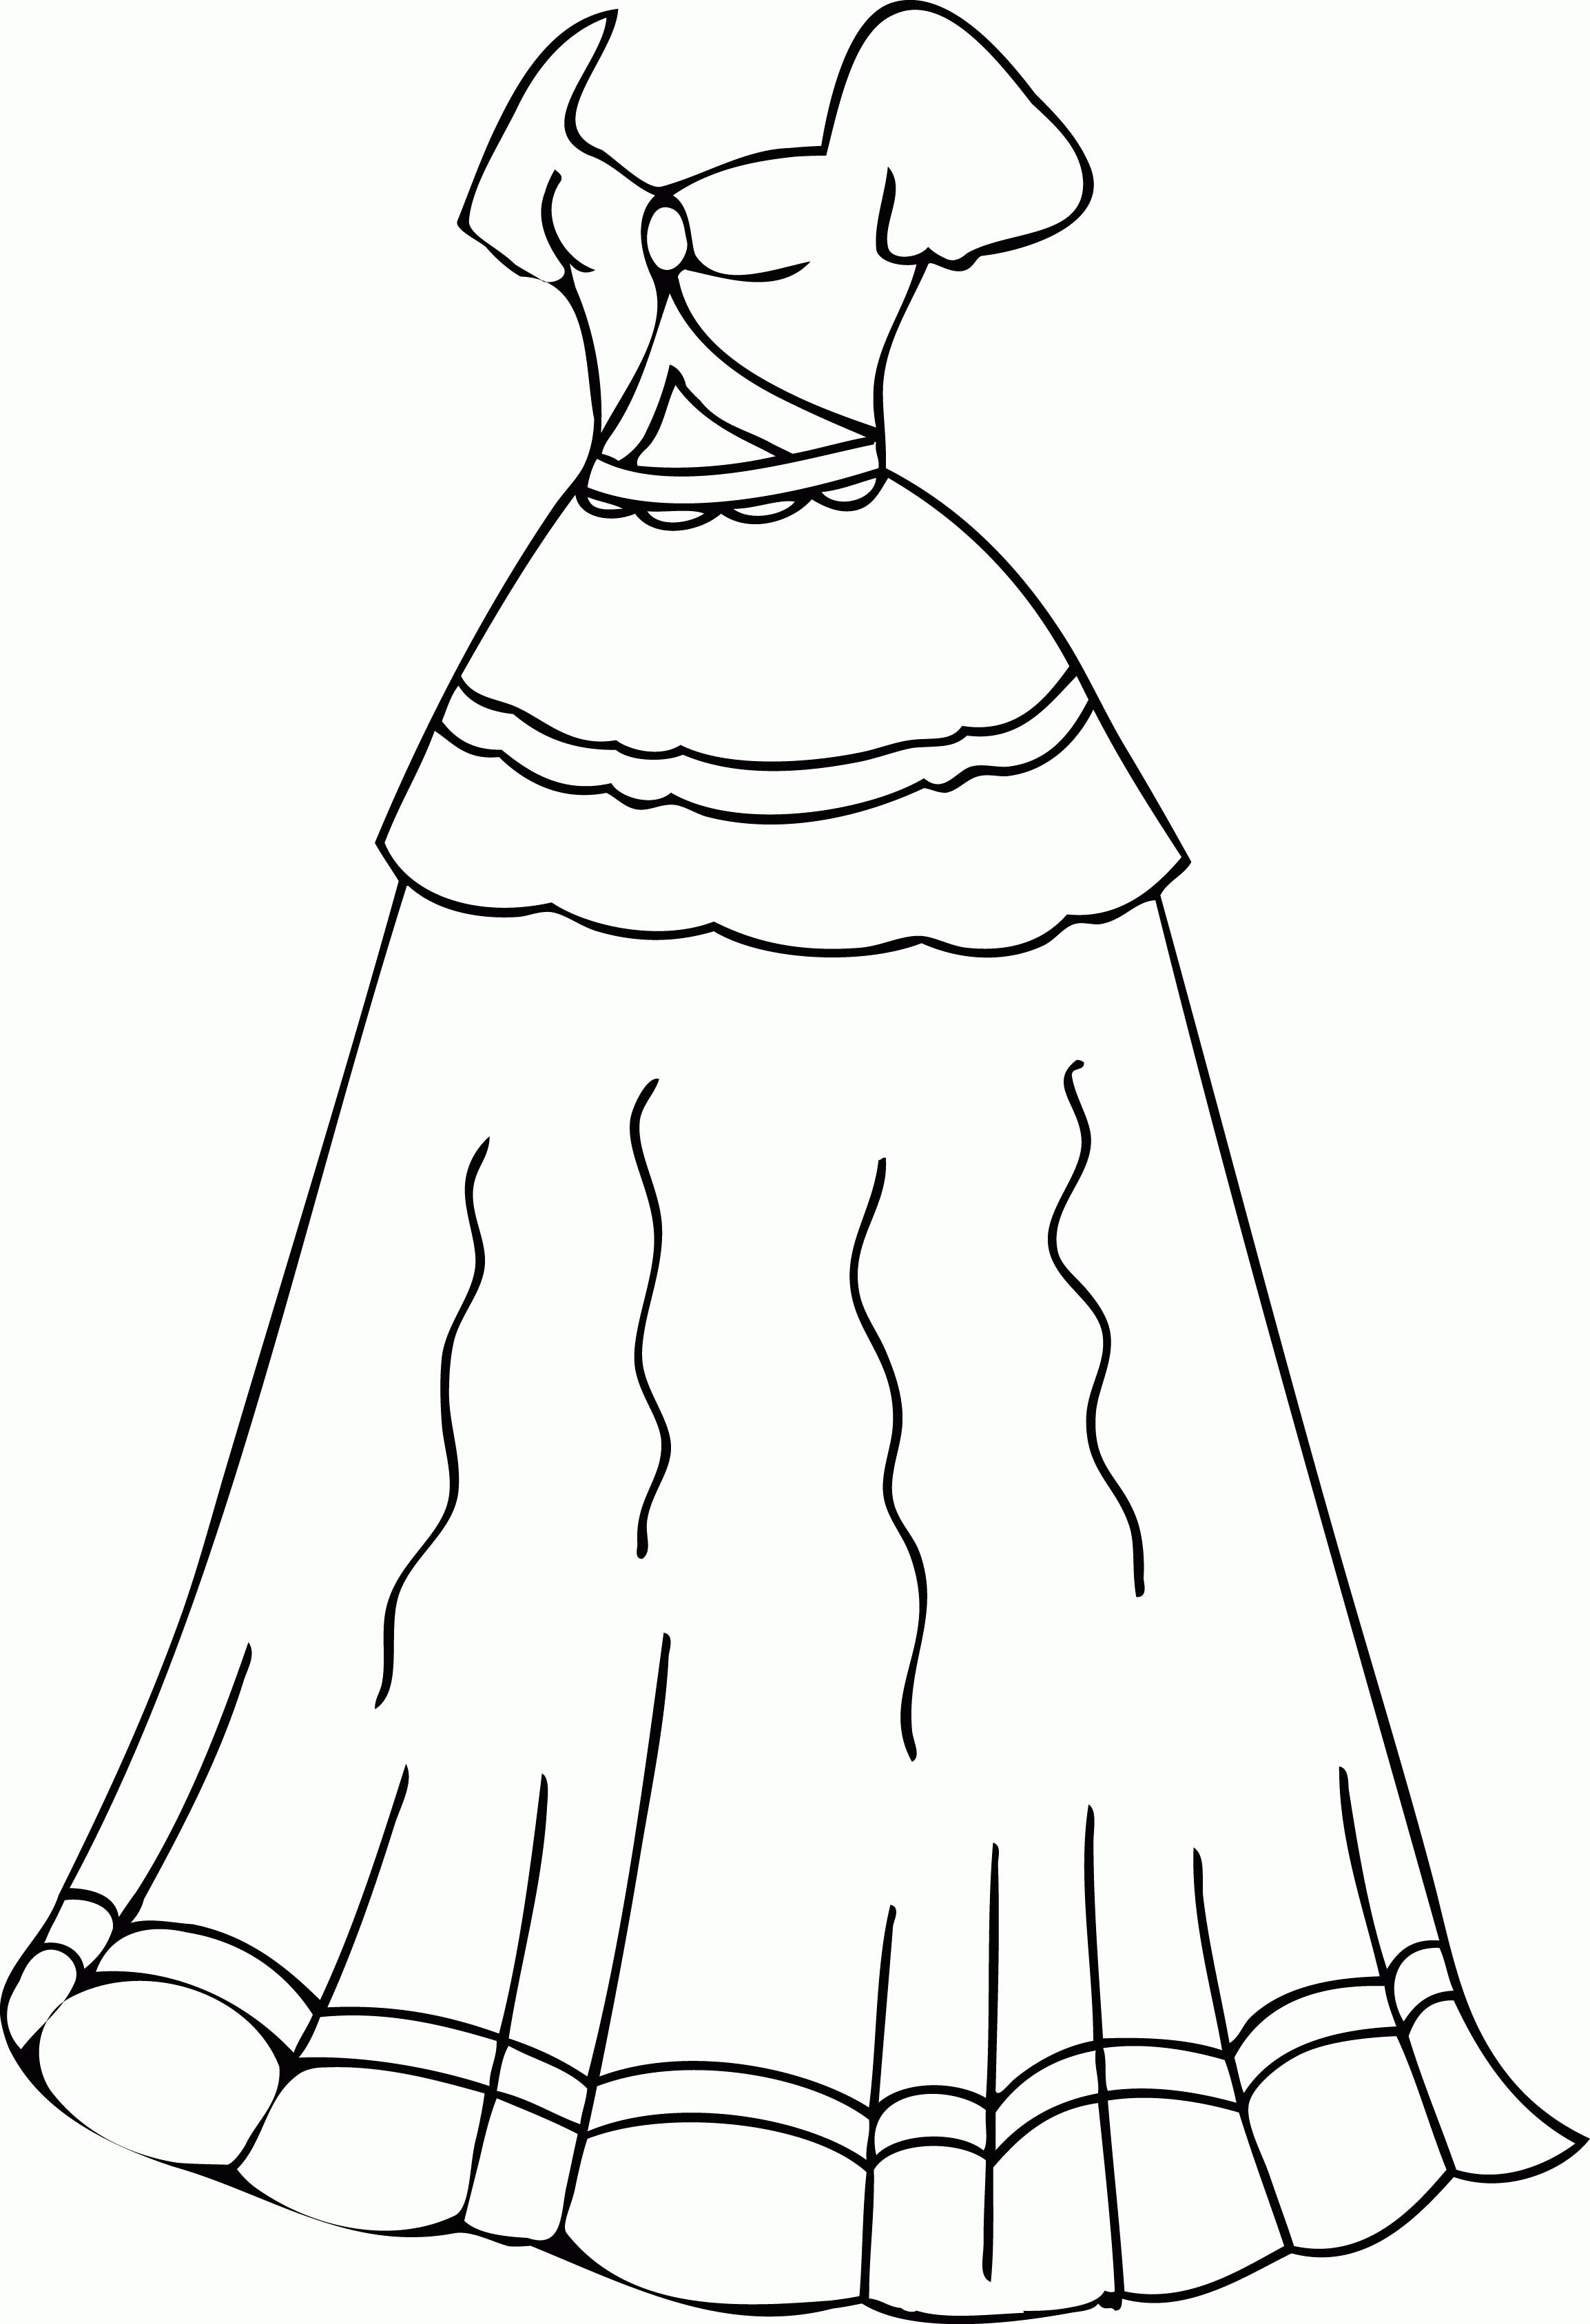 coloring page dress dress coloring pages getcoloringpagescom dress coloring page 